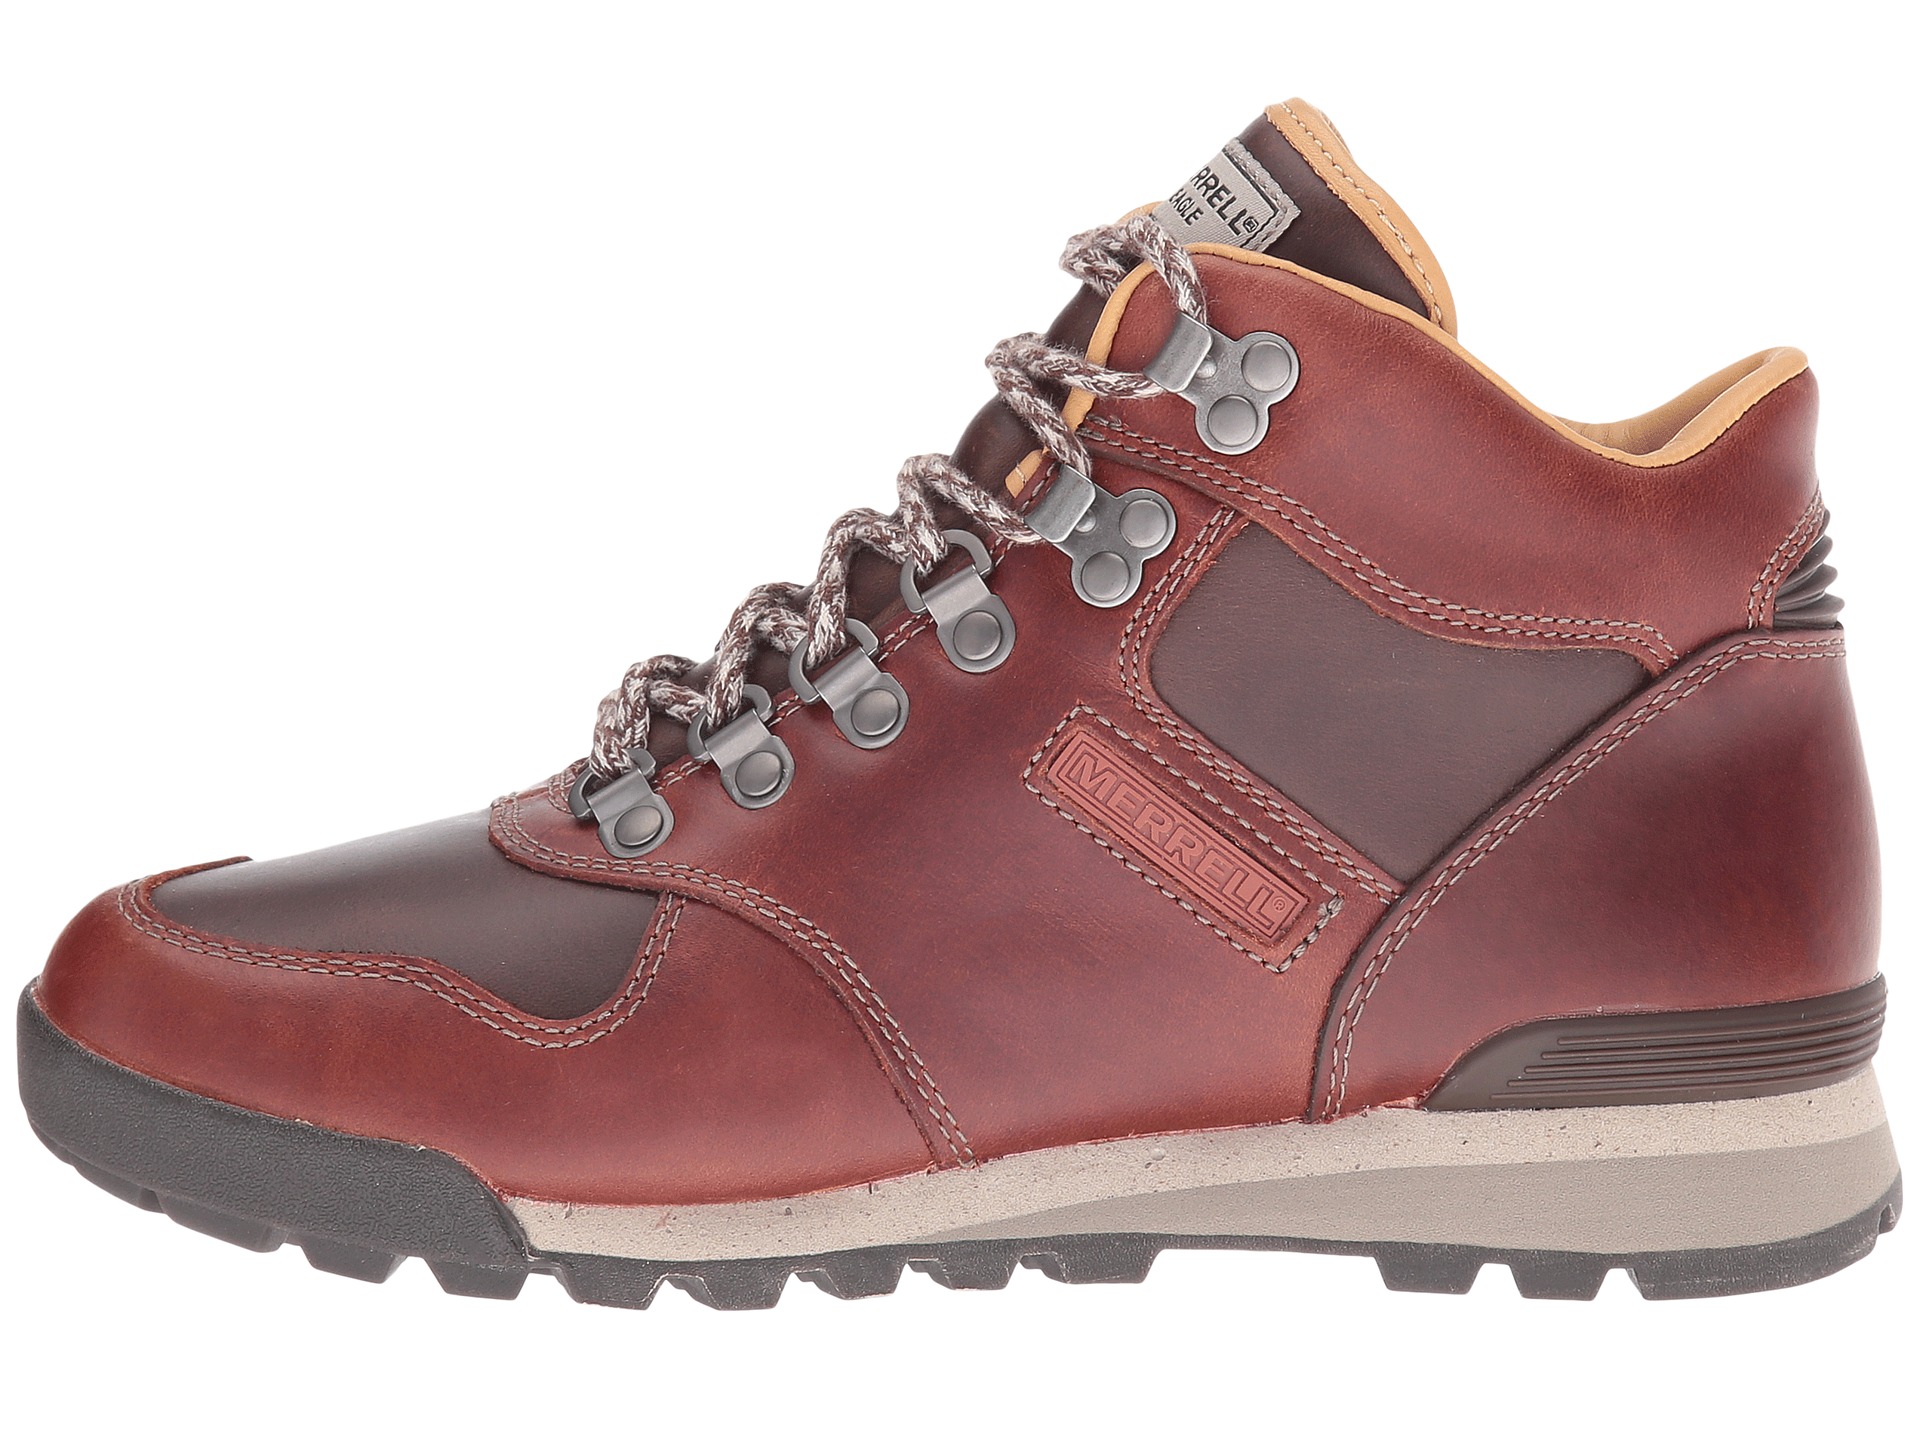 Merrell Eagle Luxe Sunned - Zappos.com Free Shipping BOTH Ways